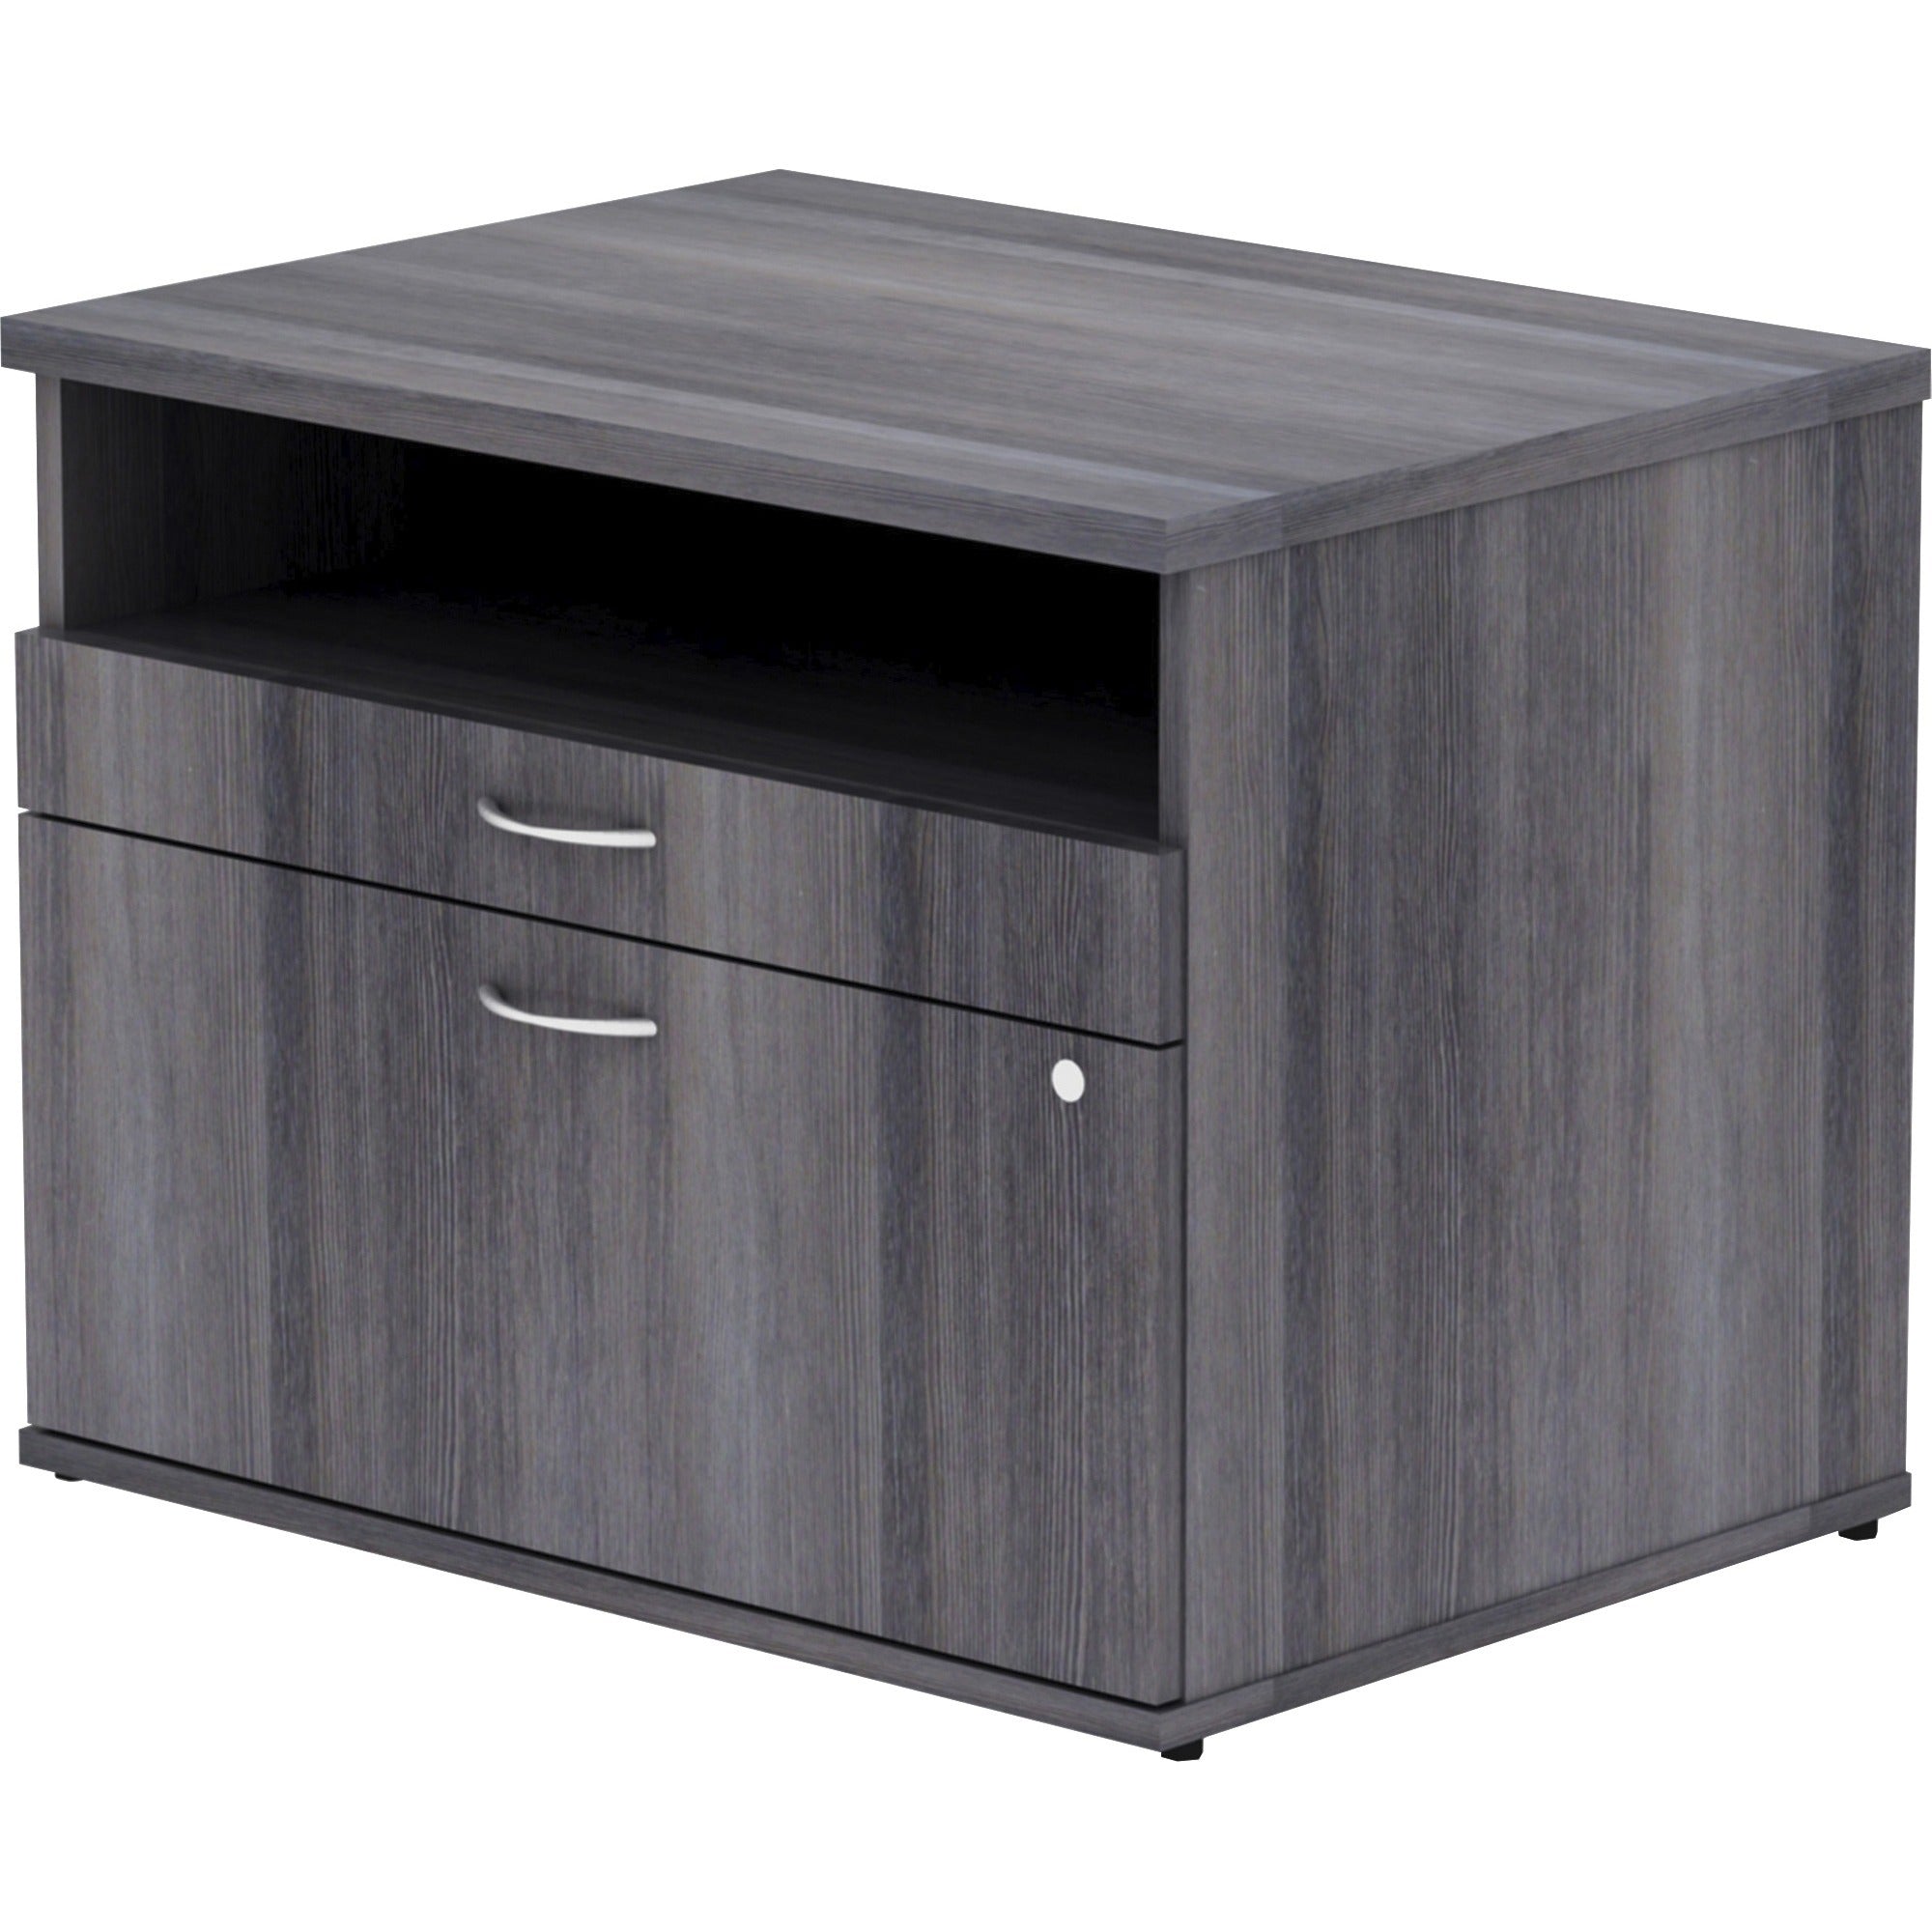 lorell-relevance-series-2-drawer-file-cabinet-credenza-w-open-shelf-295-x-22231-2-x-file-drawers-1-shelves-finish-charcoal-laminate_llr16213 - 3